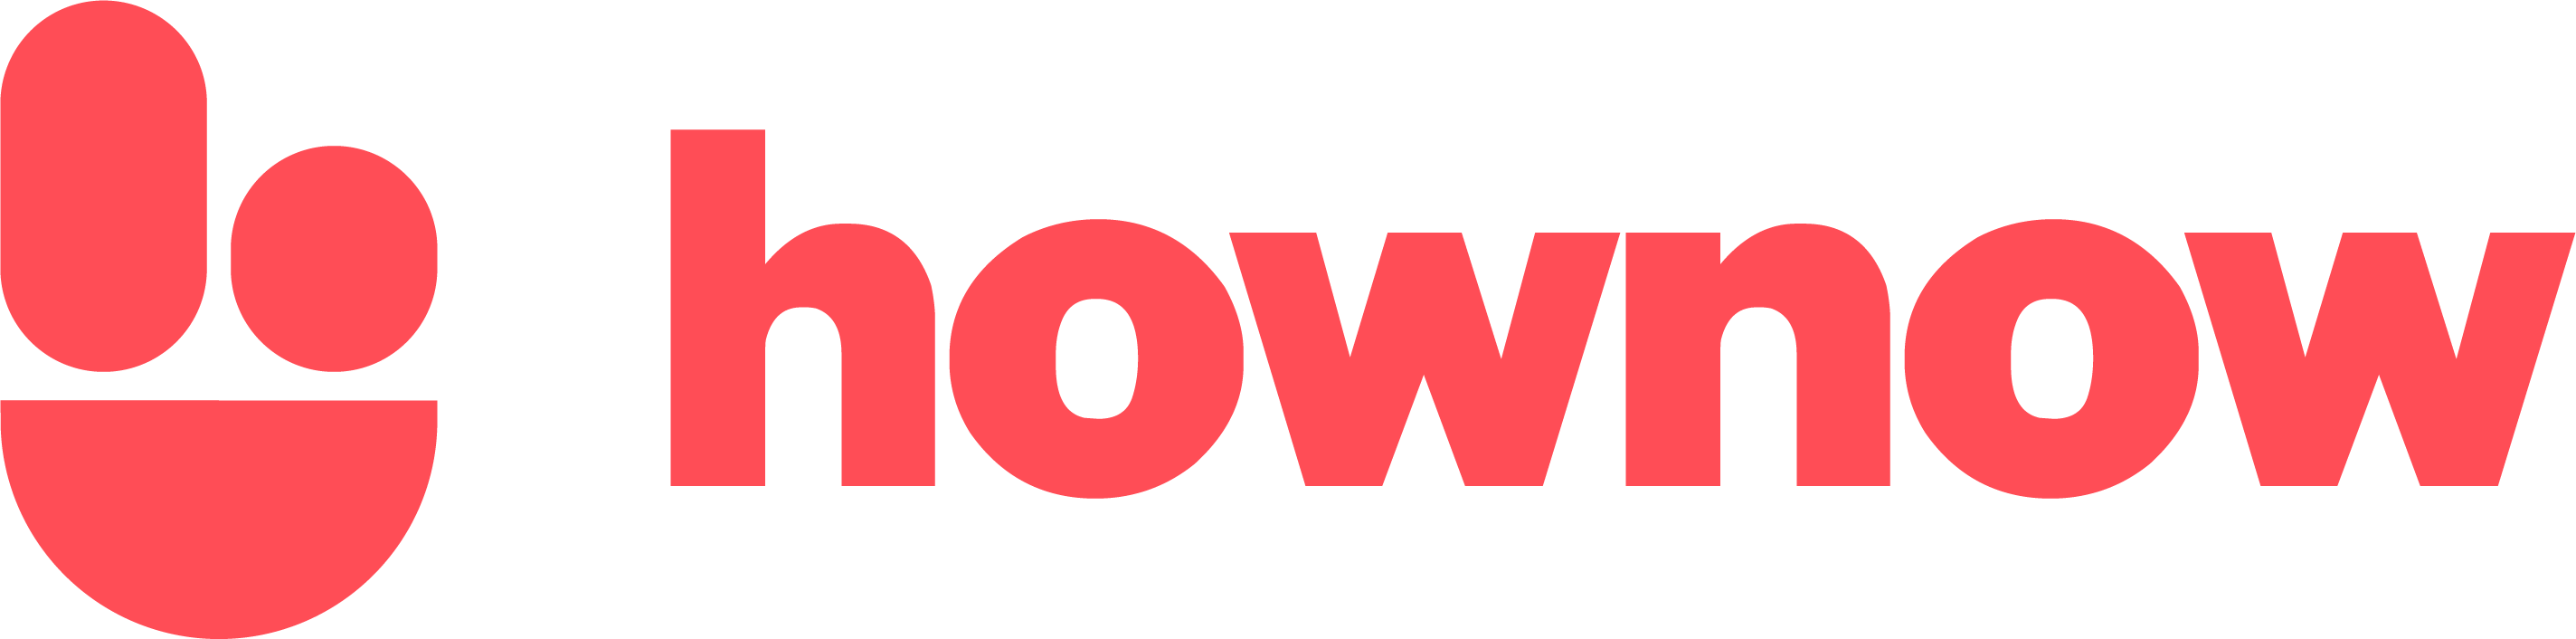 HowNow - hownow-3.png